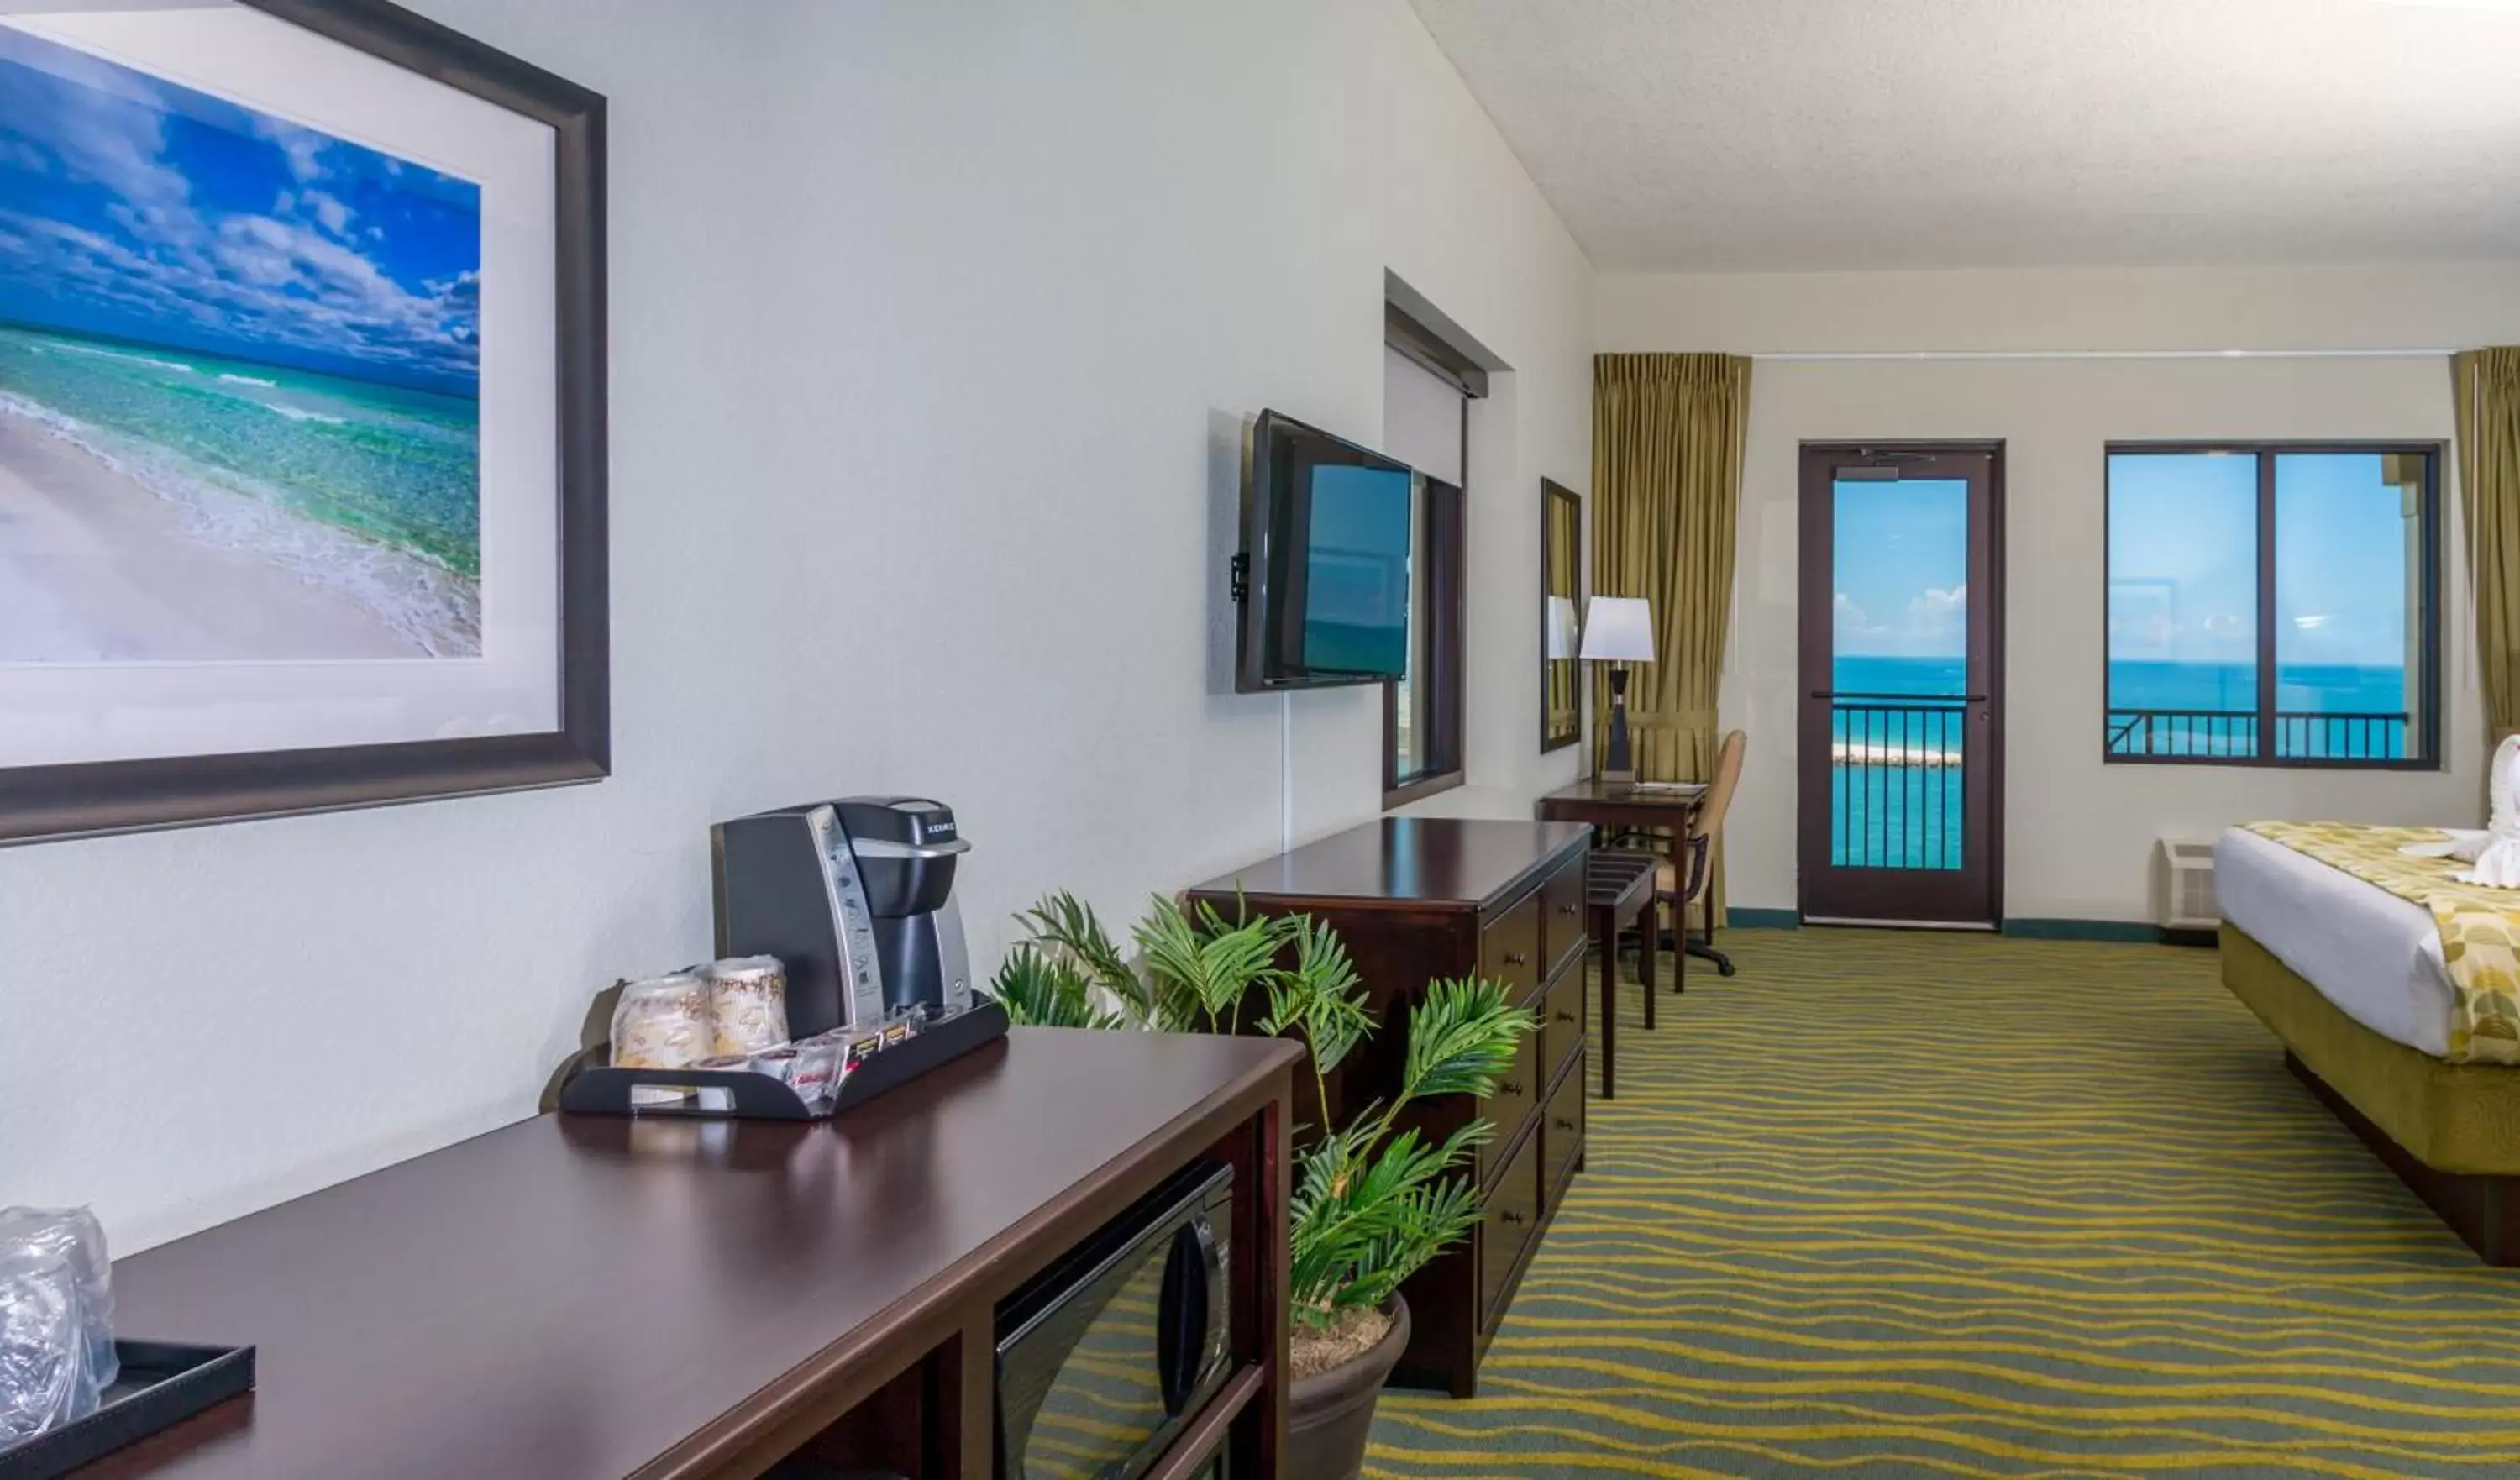 Area and facilities in Edge Hotel Clearwater Beach